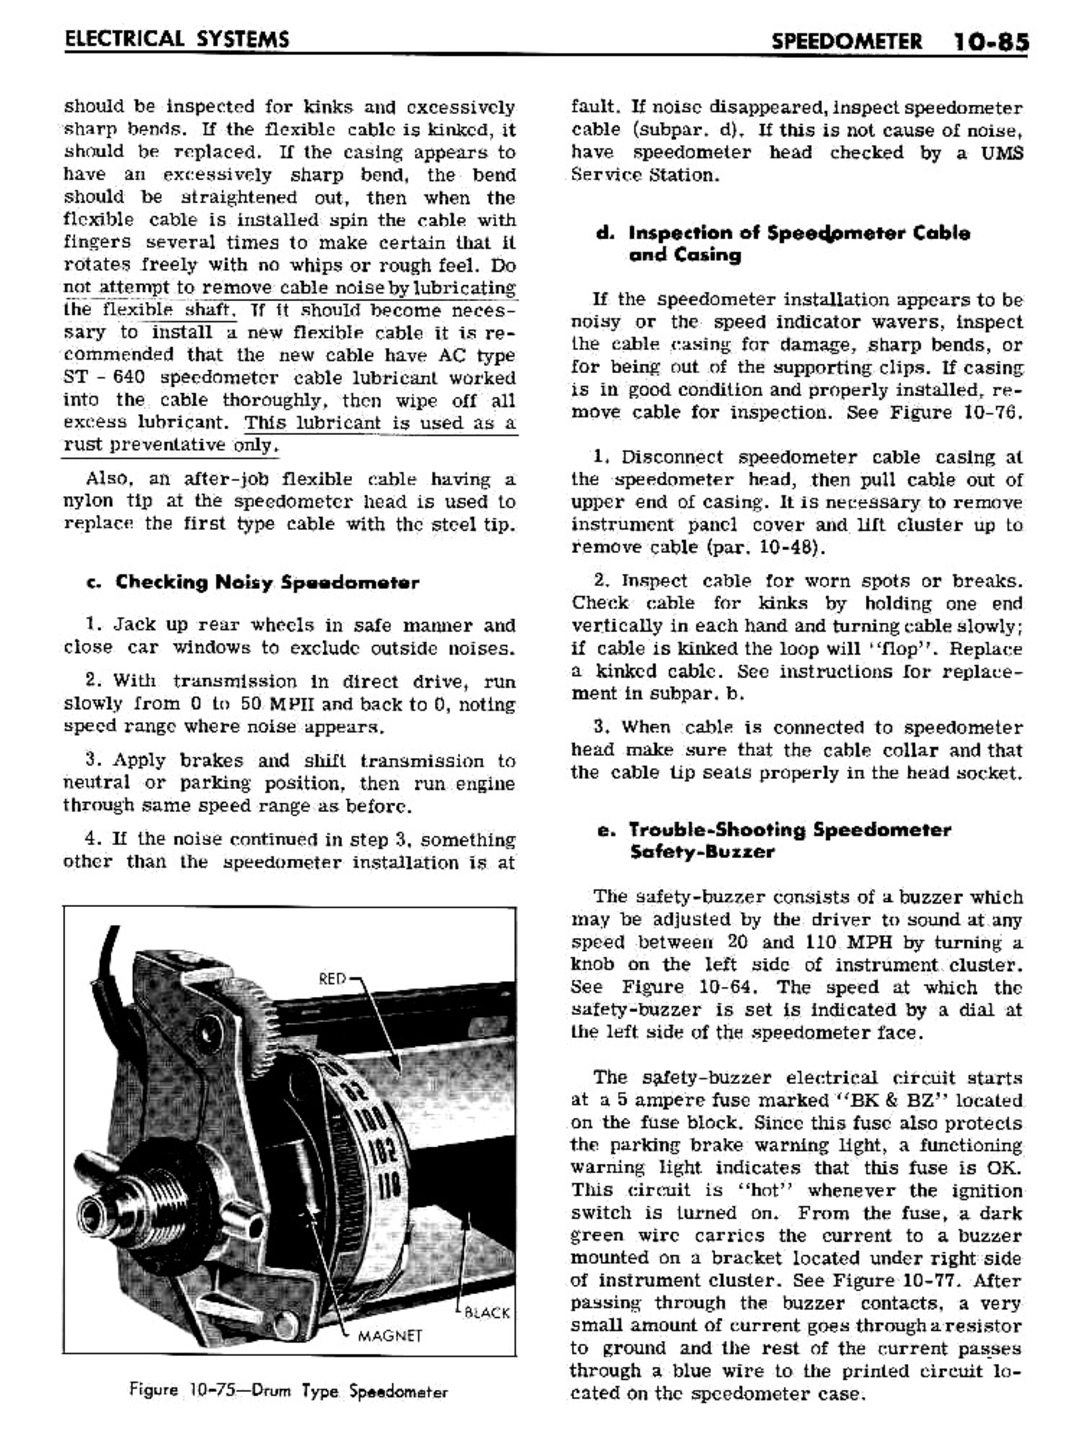 n_10 1961 Buick Shop Manual - Electrical Systems-085-085.jpg